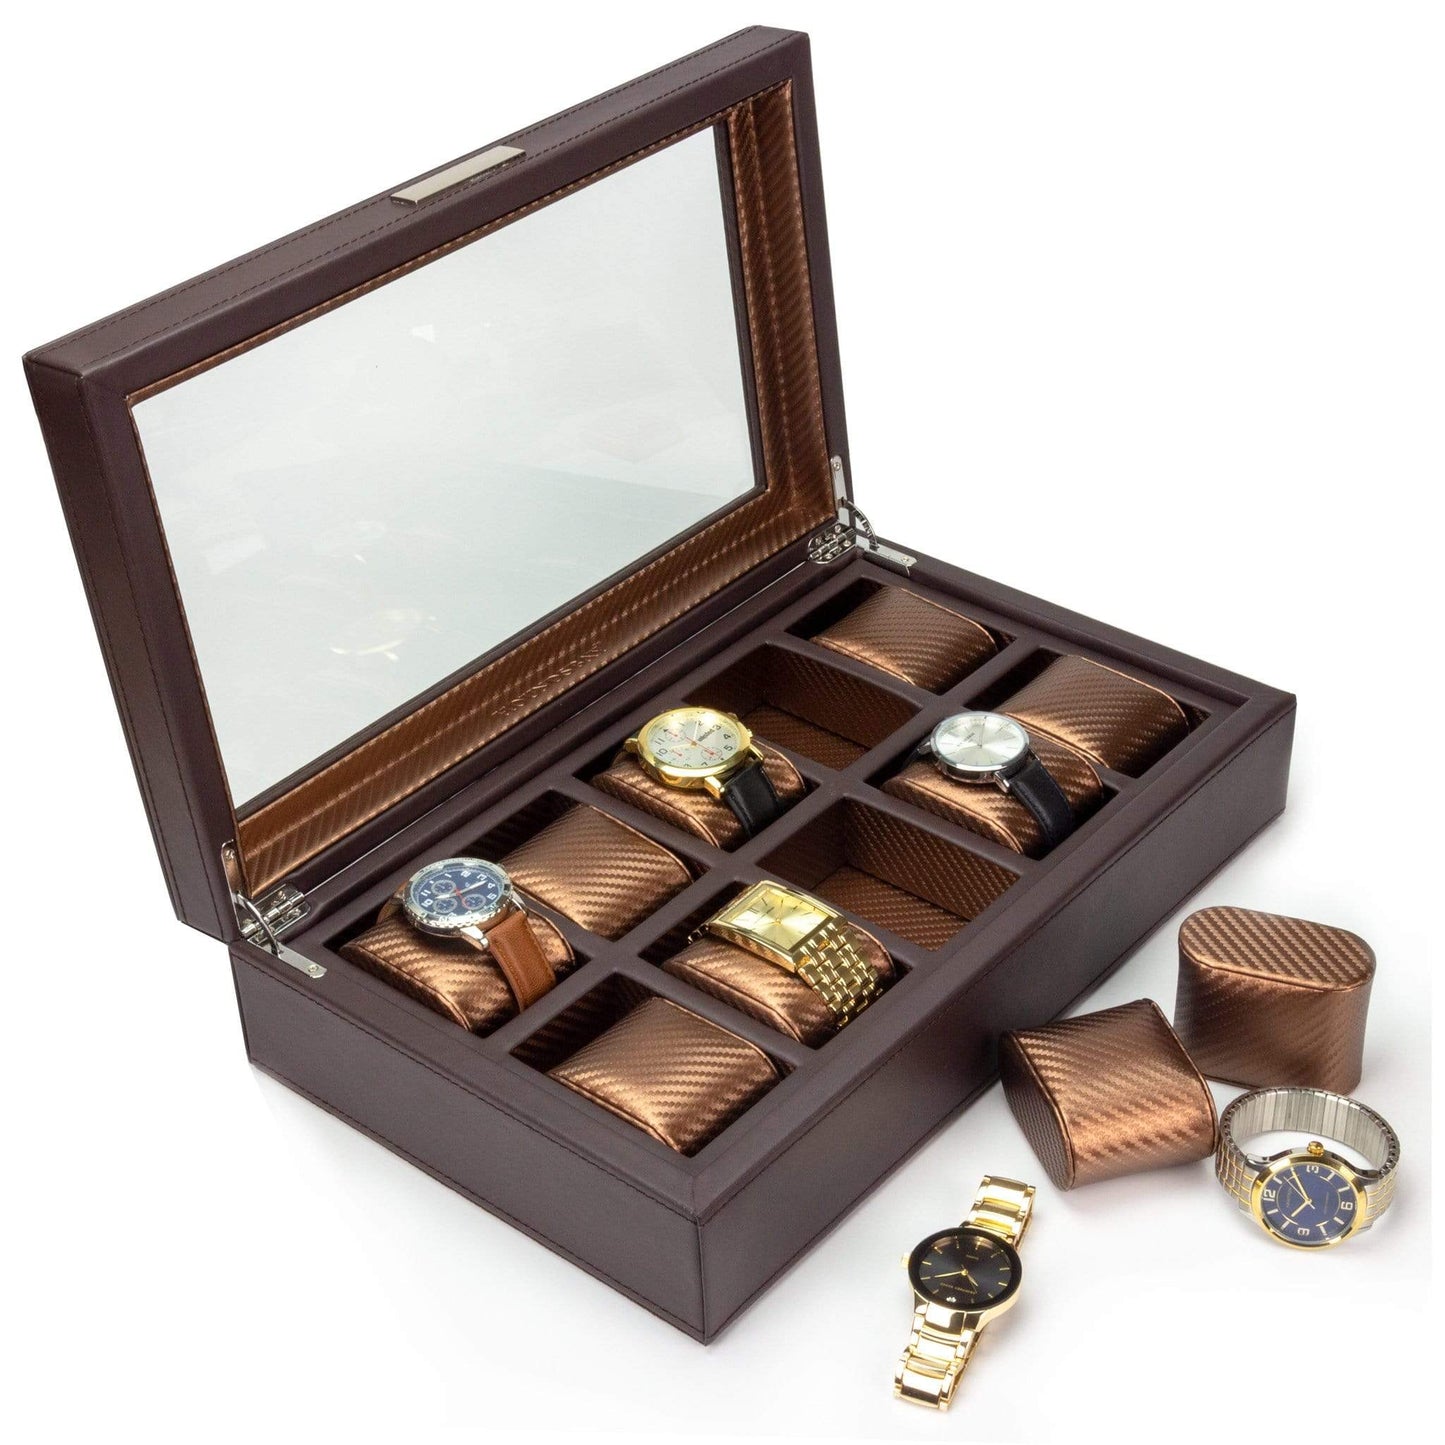 HOUNDSBAY Watch Box Dark Brown The Mariner - Watch Display Box with Carbon Fiber Patterned Interior - 10 Watches